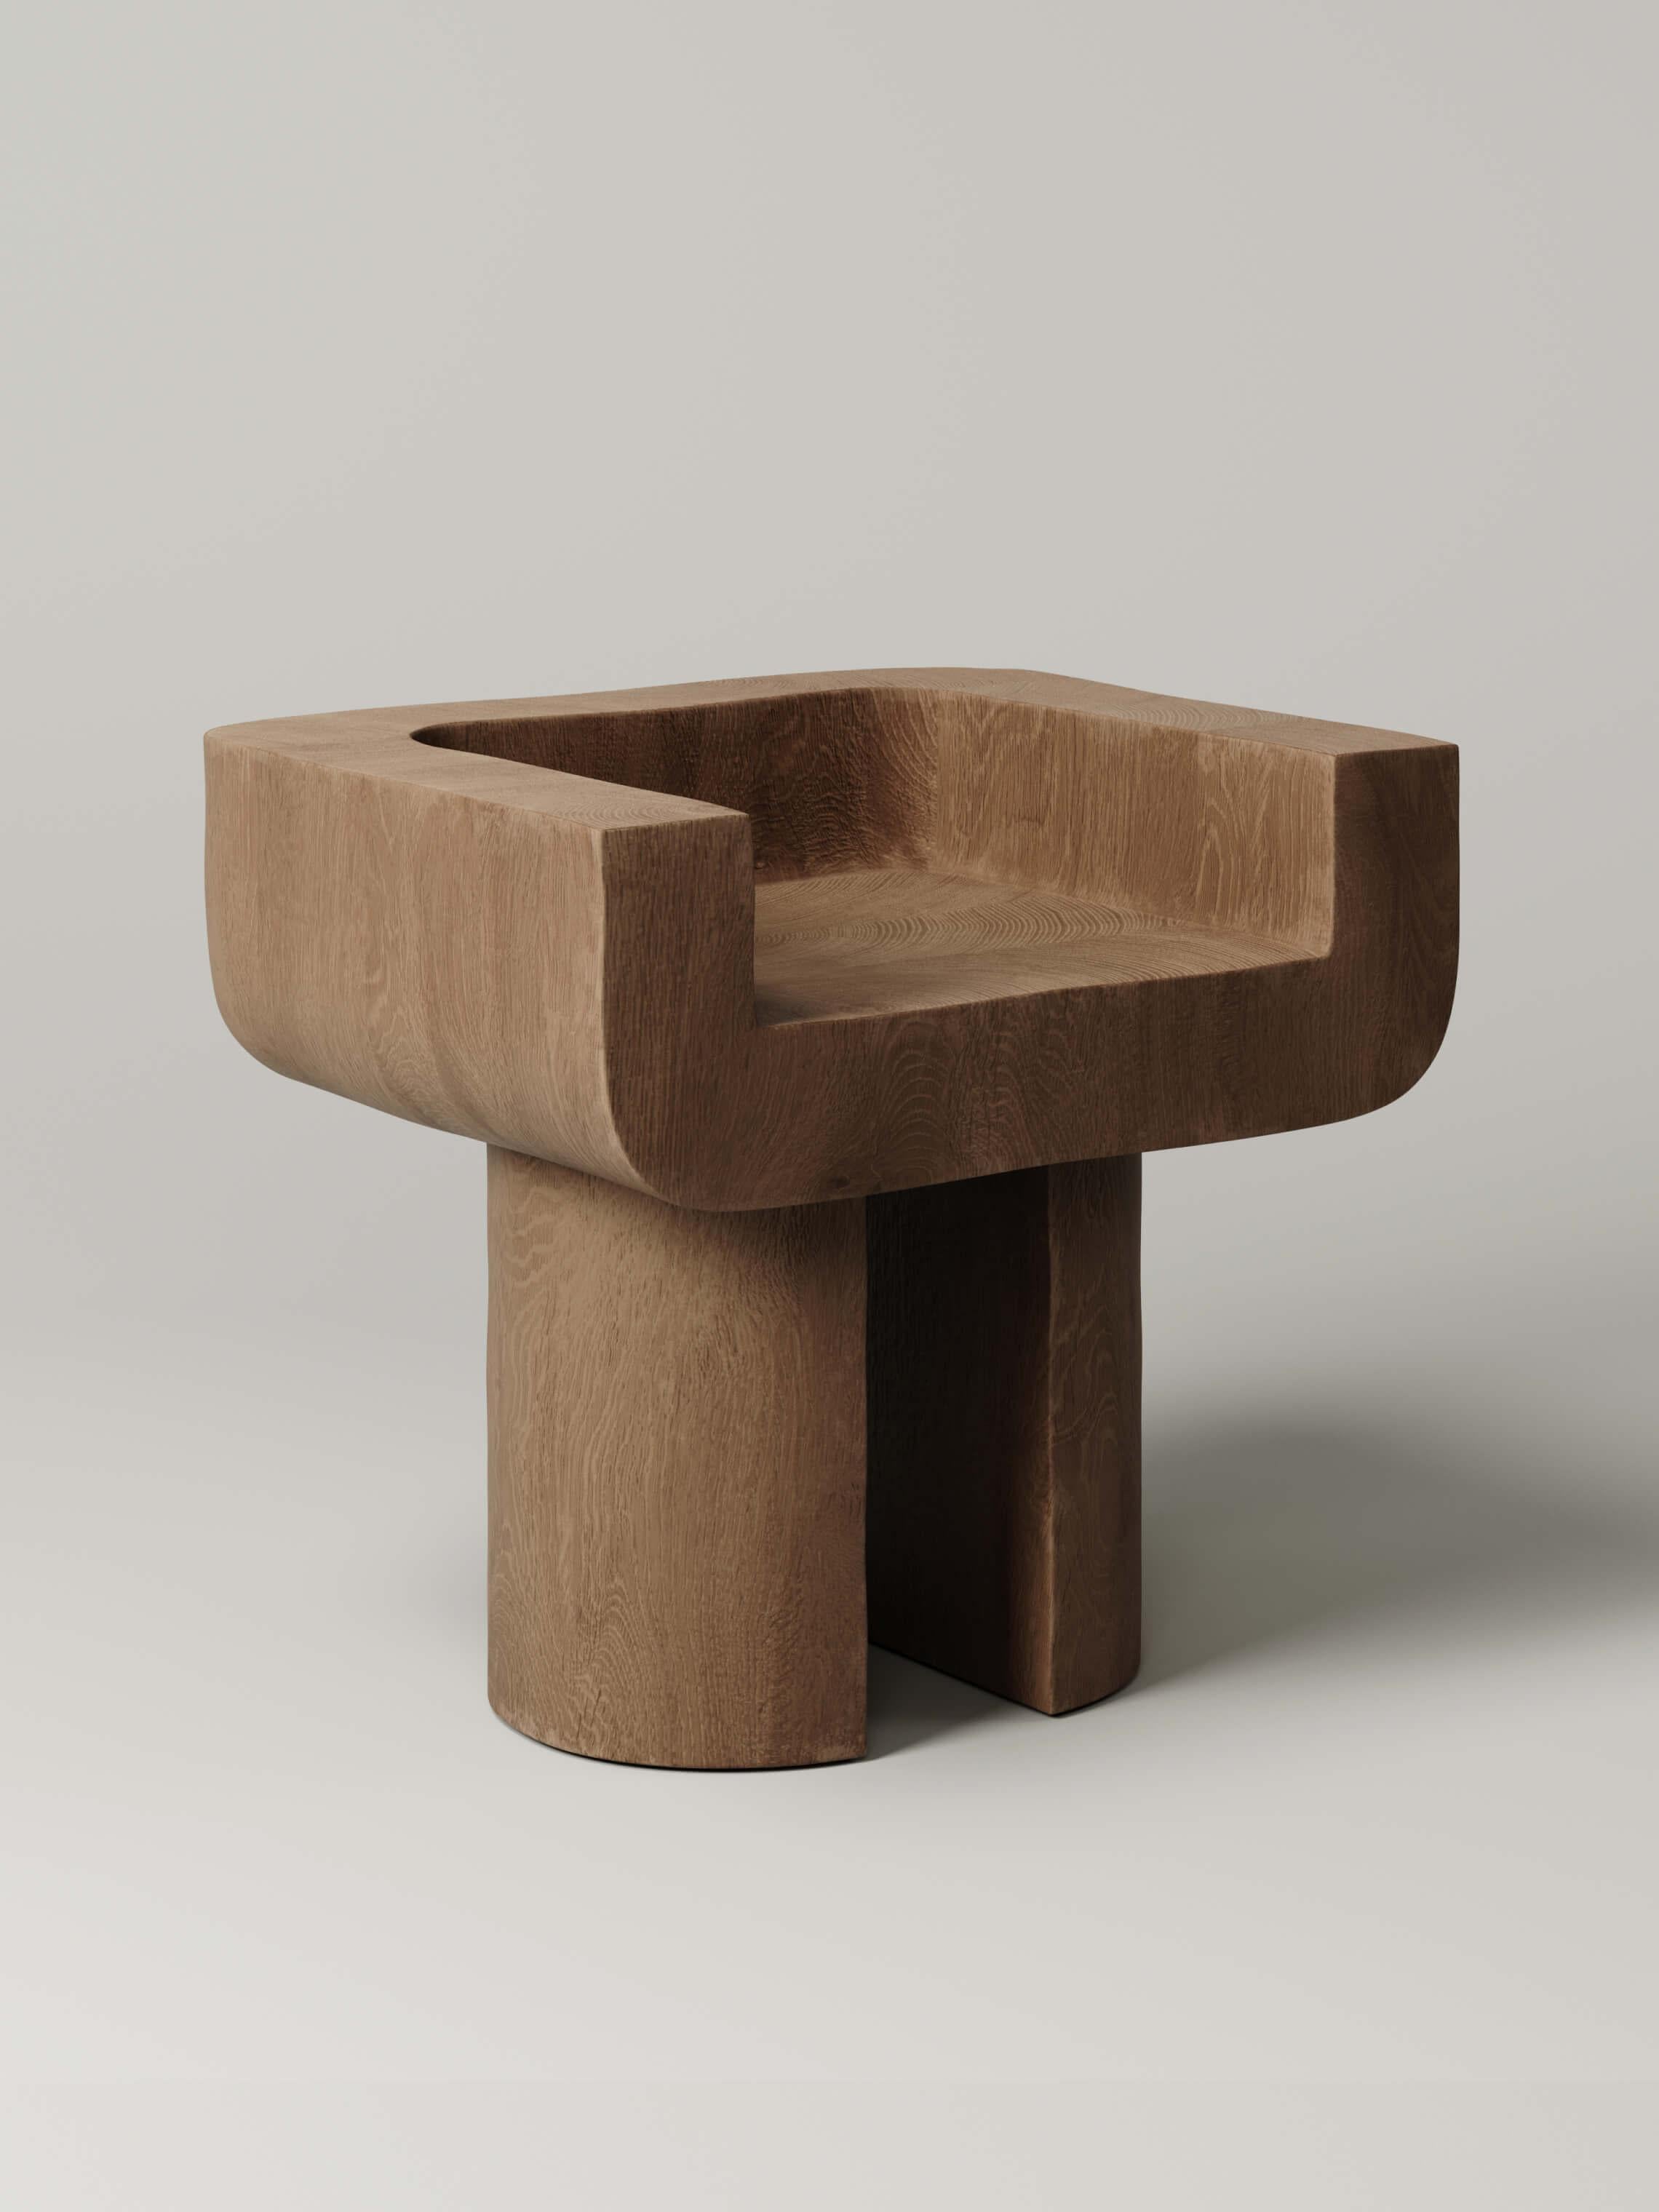 M_001 Oak Chair by Monolith Studio
Signed and Numbered.
Dimensions: D 53,5 x W 65 x H 58,5 cm.
Materials: Oak. 

Available in travertine, white onyx, lava rock, and white oak. Please contact us. 

Monolith, founded in 2022 by Marc Personick, leans